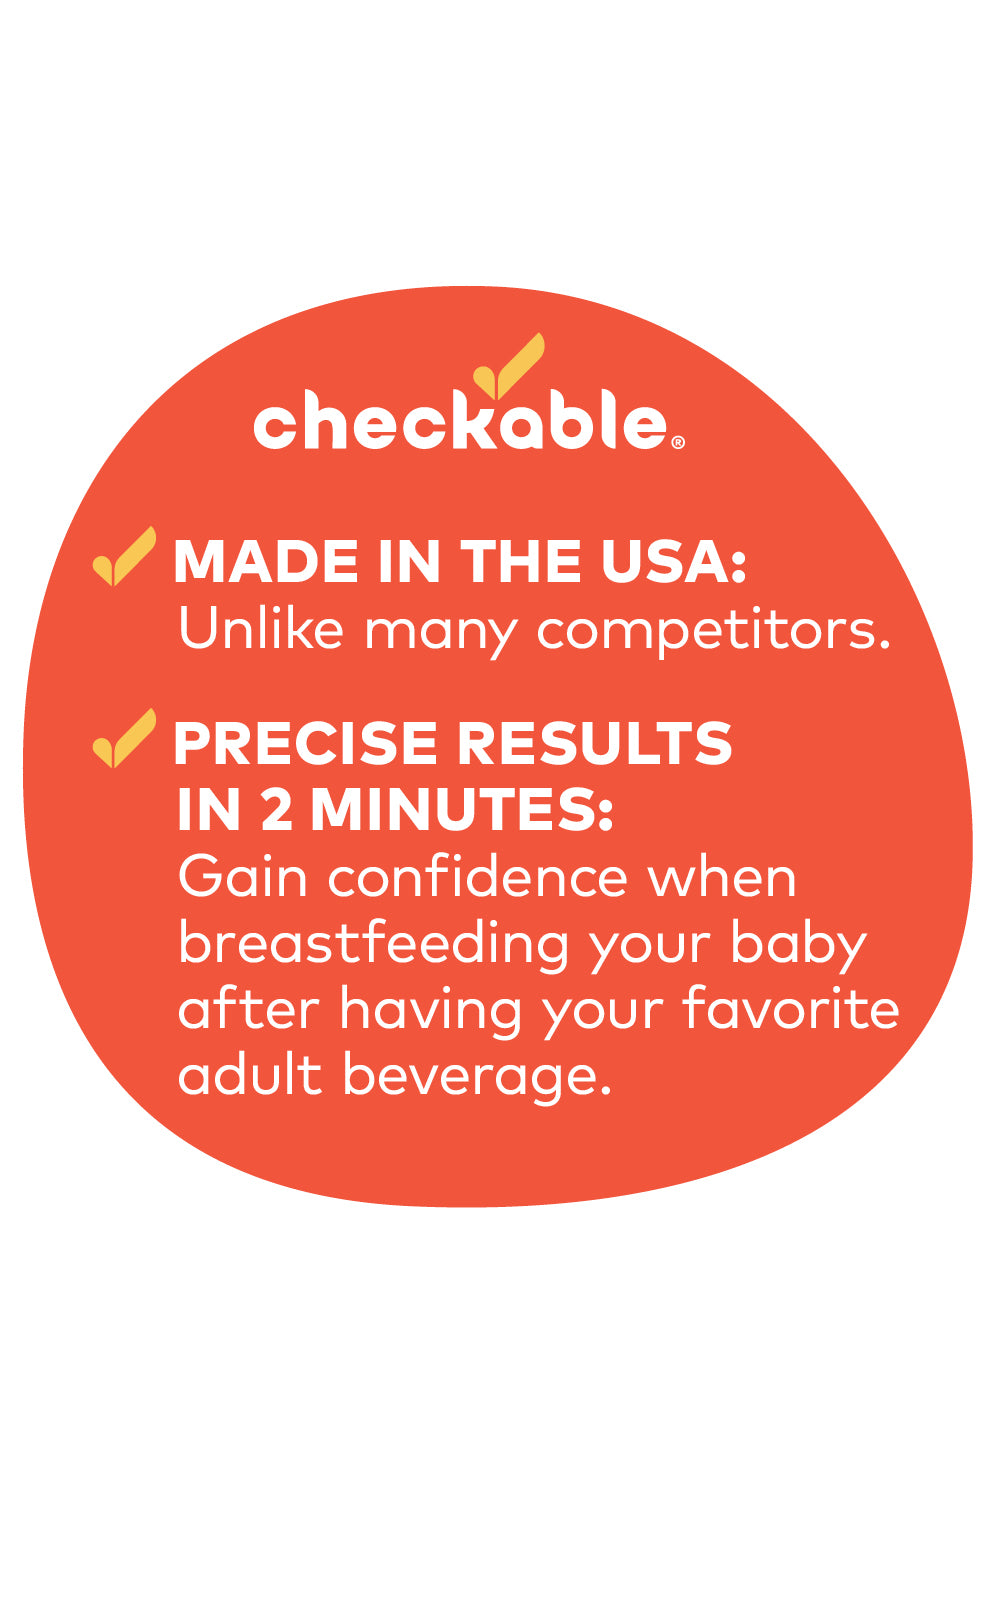 Easy@Home Breastmilk Alcohol Test Strips, at Home Alcohol Test for  Breastfeeding and Lactation Milk Testing, Give Nursing Mothers Clarity,  Easy, Quick